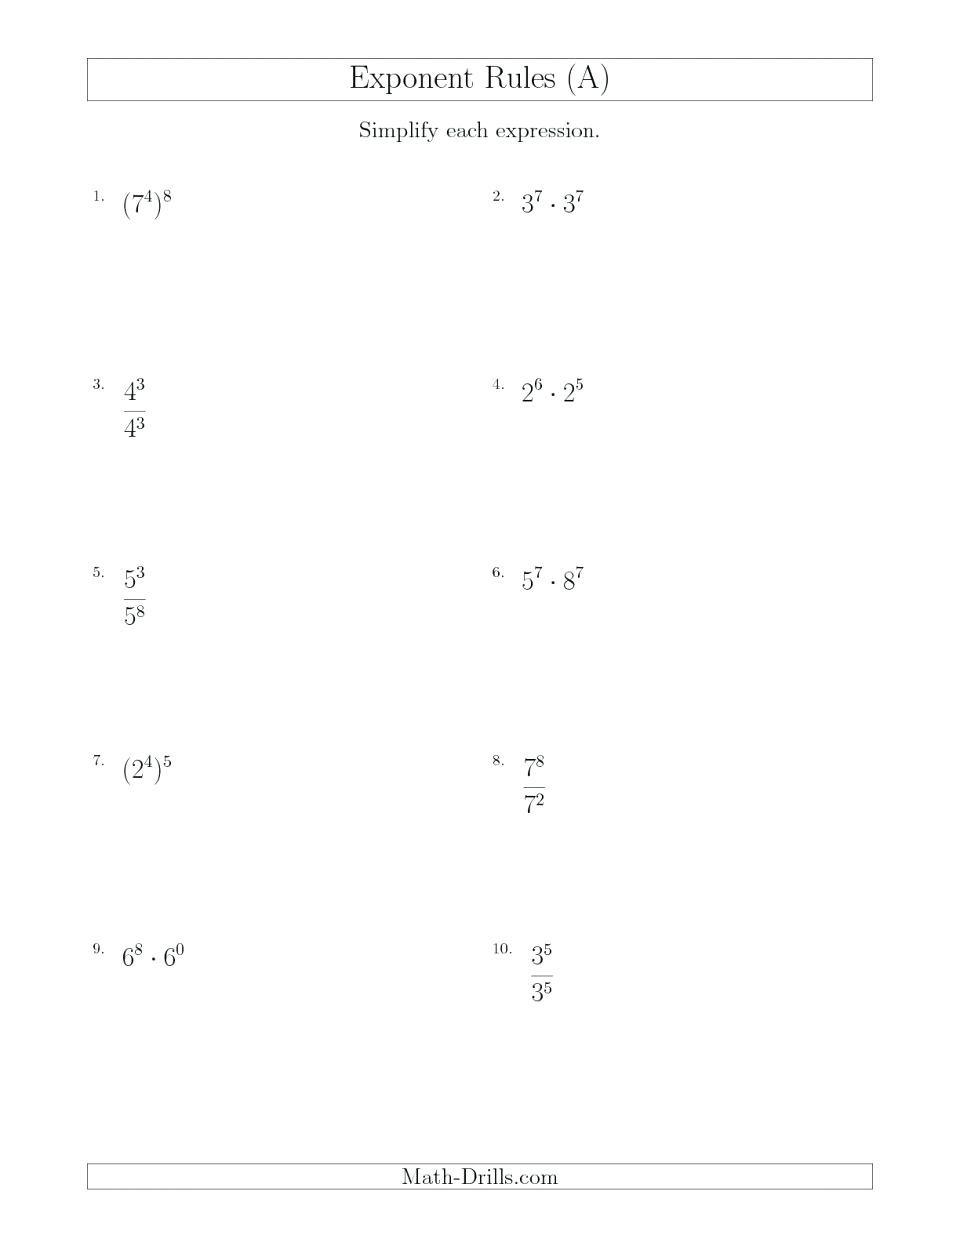 8-best-images-of-rational-numbers-7th-grade-math-worksheets-algebra-1-rational-numbers